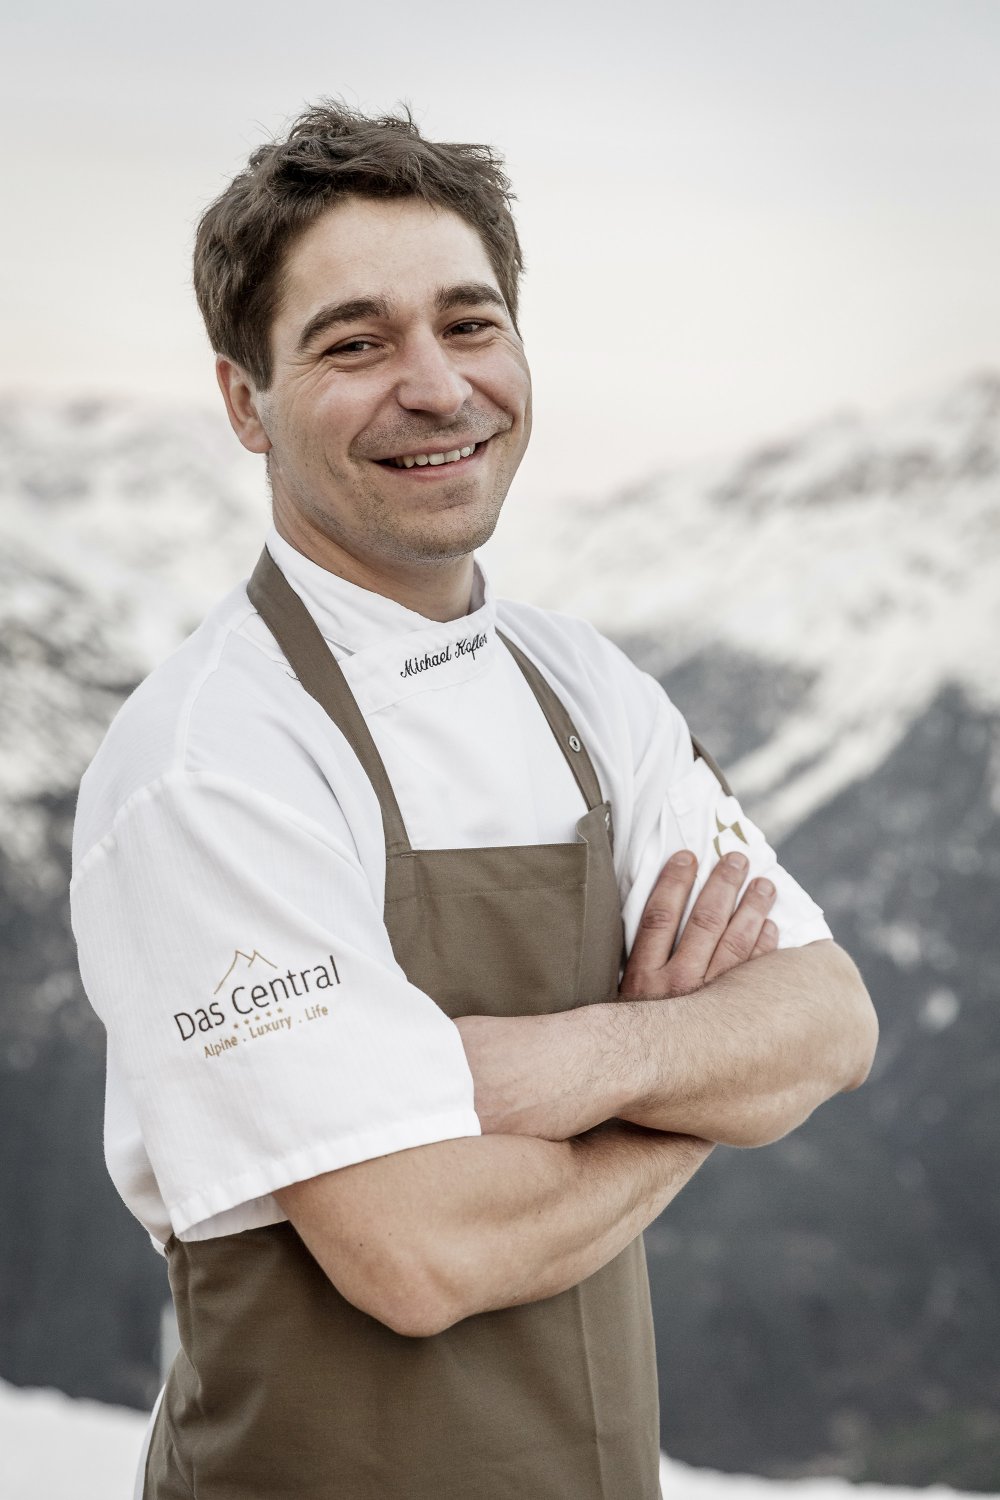 Michael Kofler - chef at the 5-star hotel DAS CENTRAL in Solden, Tyrol